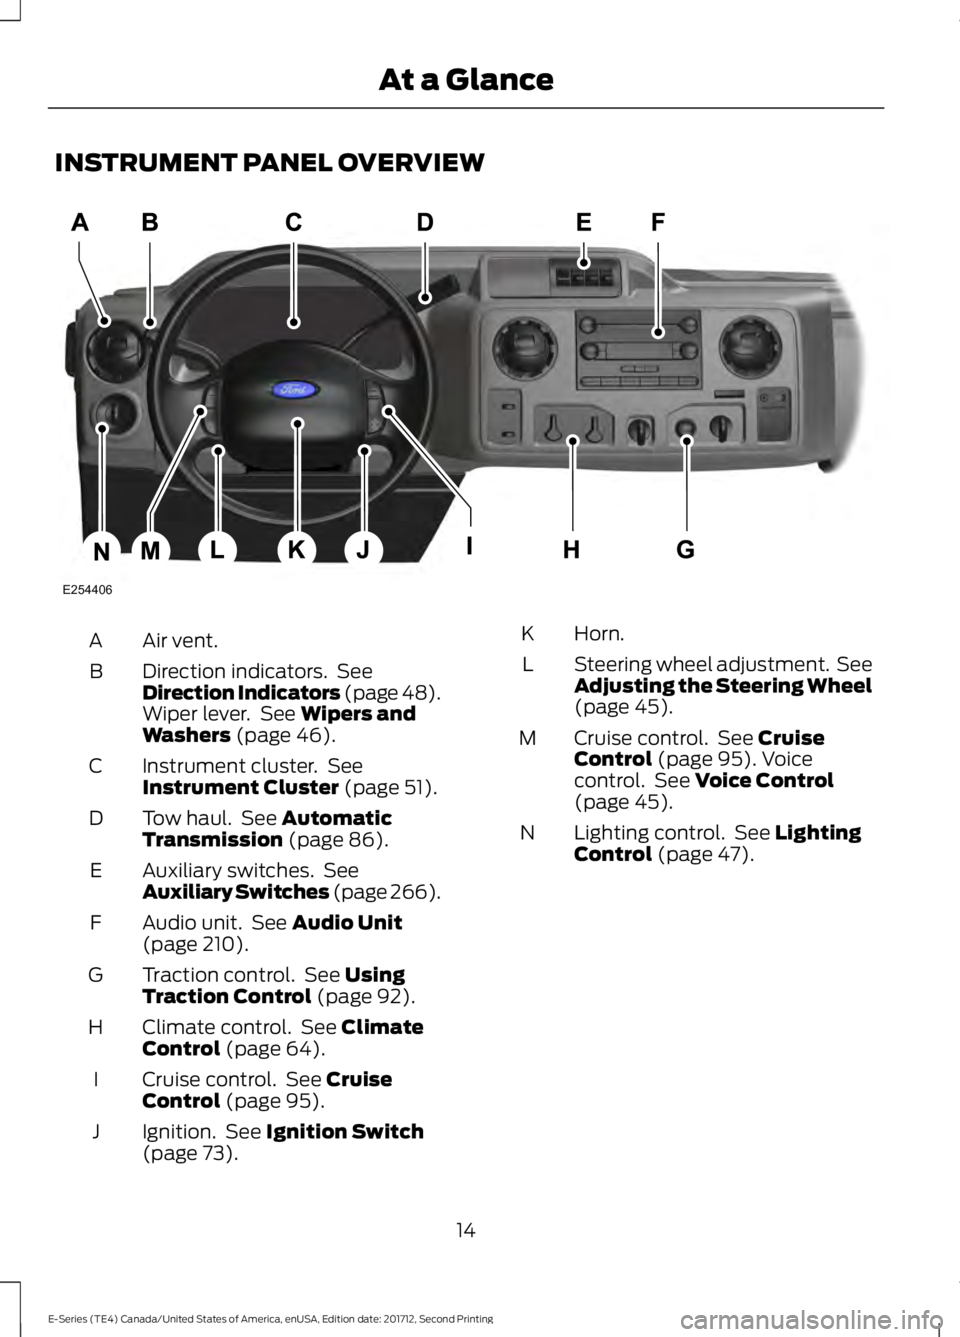 FORD E-350 2018 User Guide INSTRUMENT PANEL OVERVIEW
Air vent.
A
Direction indicators.  See
Direction Indicators (page 48).
Wiper lever.  See Wipers and
Washers (page 46).
B
Instrument cluster.  See
Instrument Cluster
 (page 51